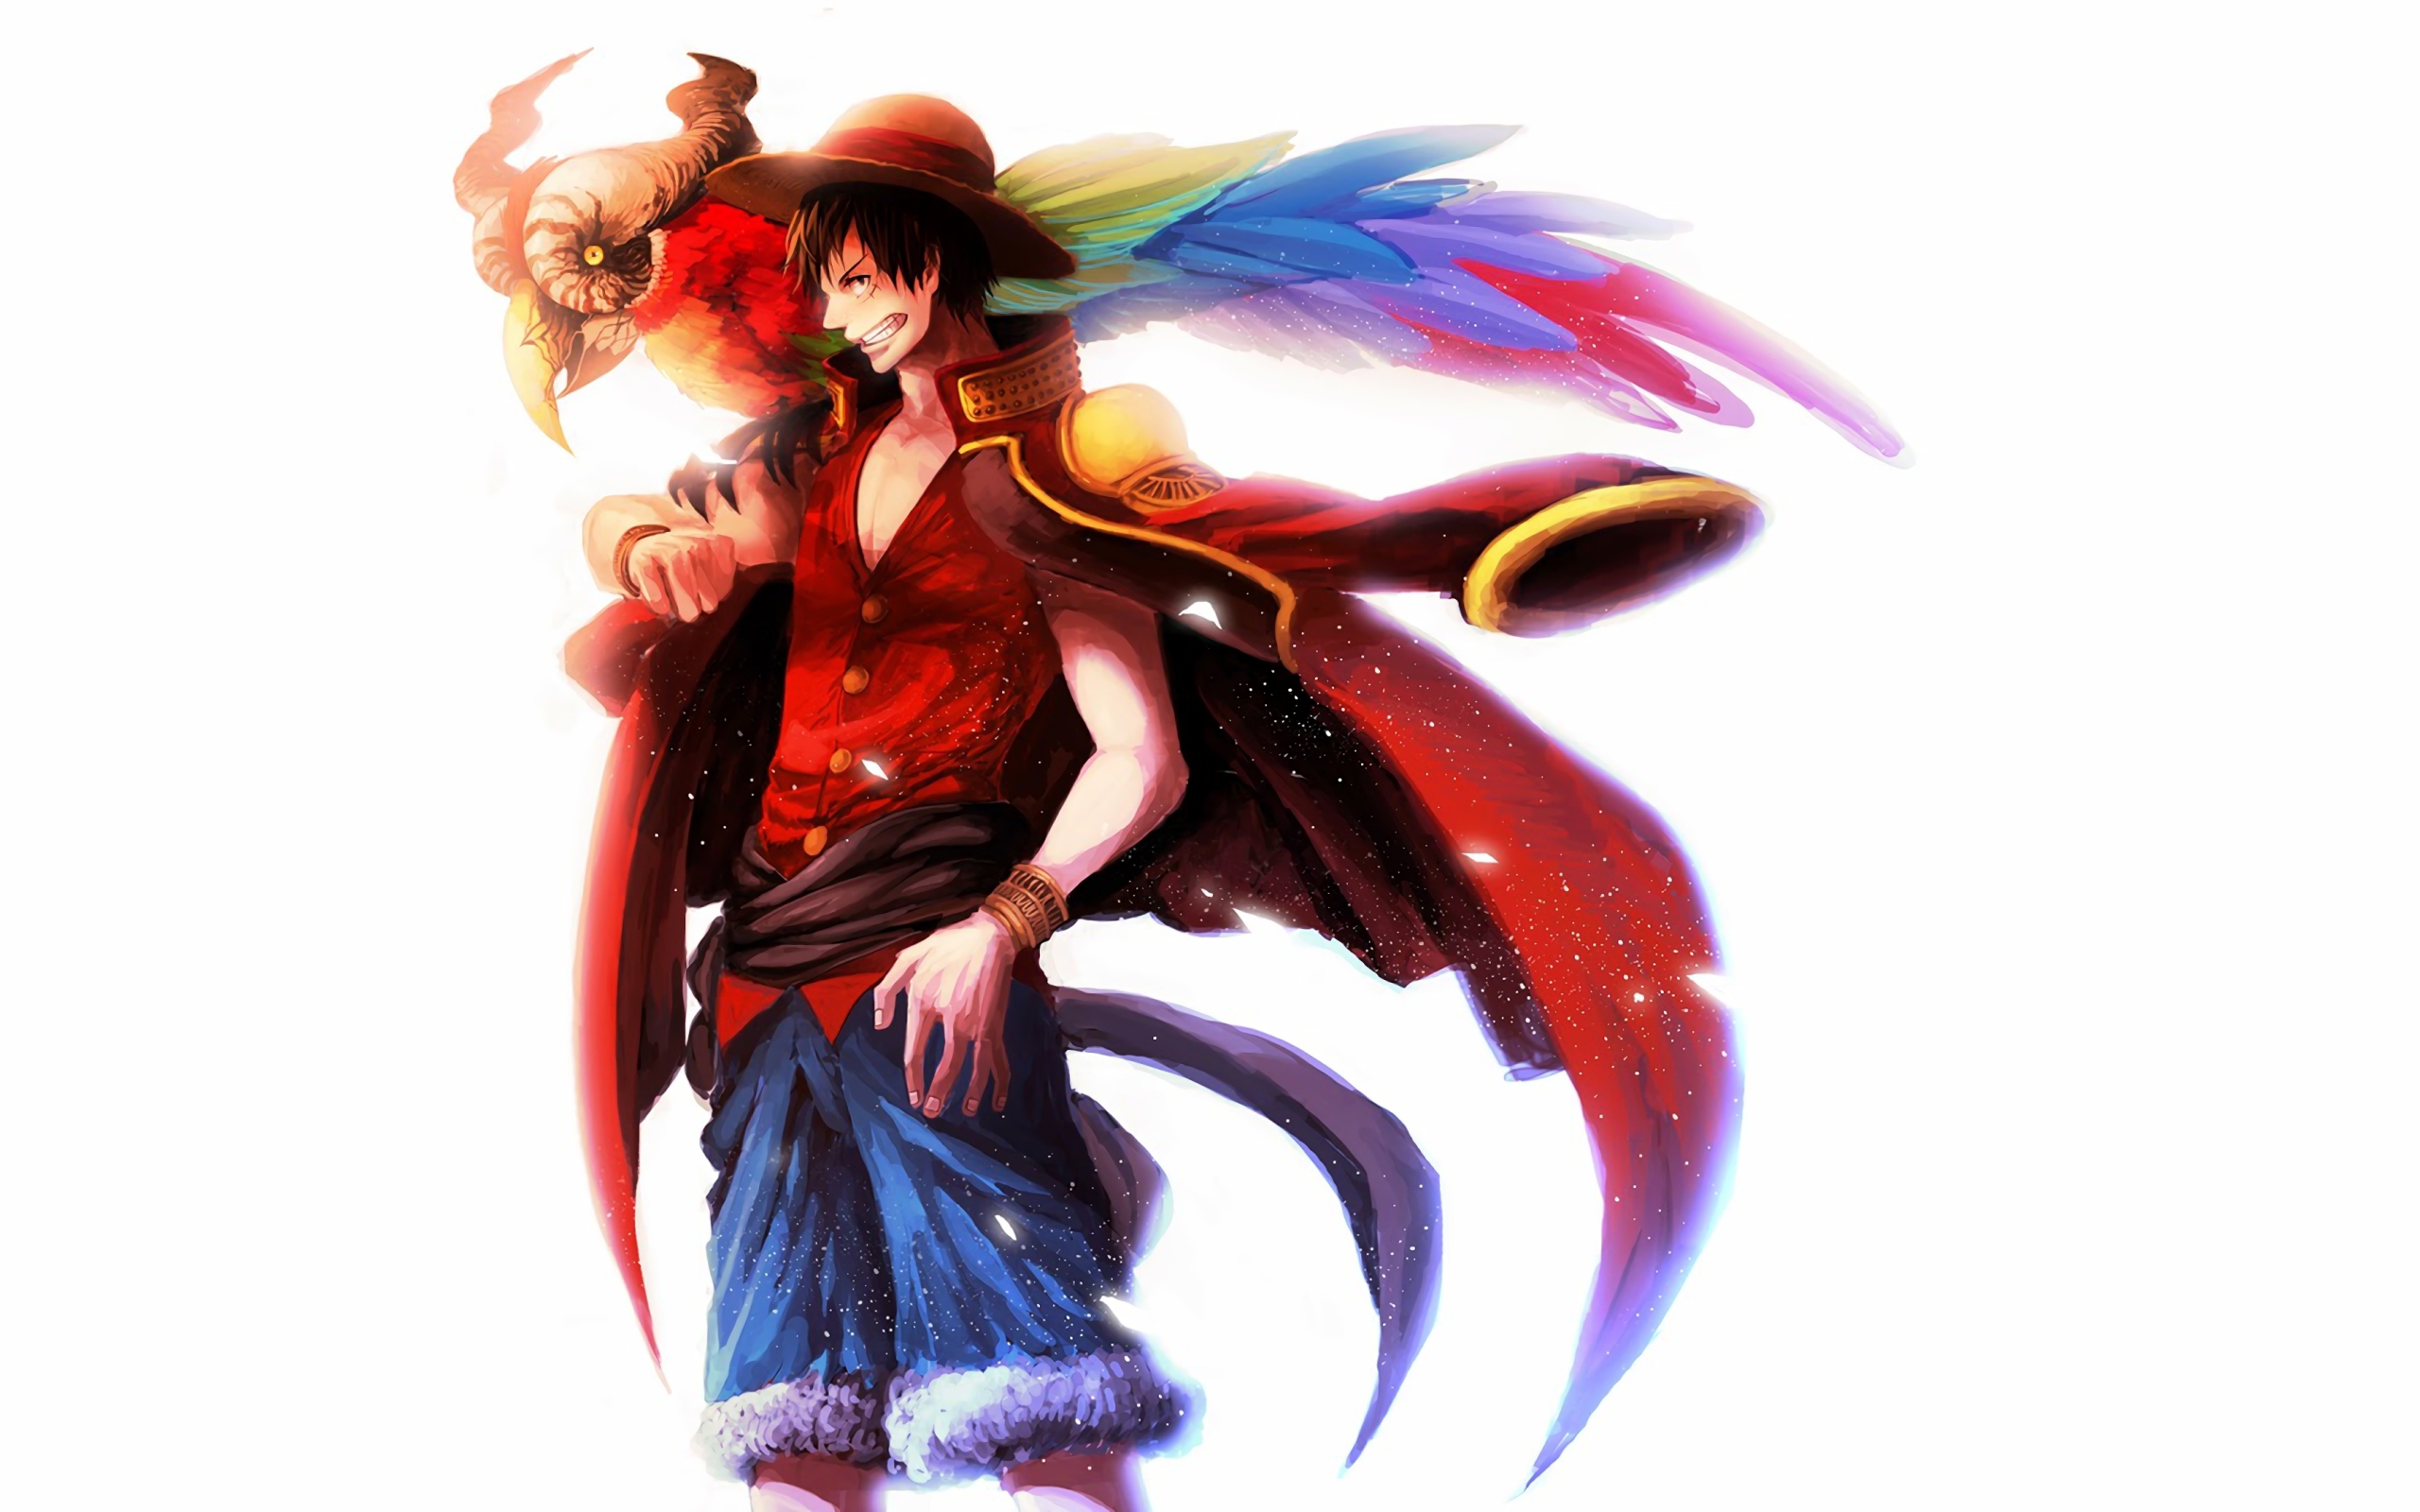 Wallpaper Of Anime, One Piece, D - One Piece Luffy - HD Wallpaper 